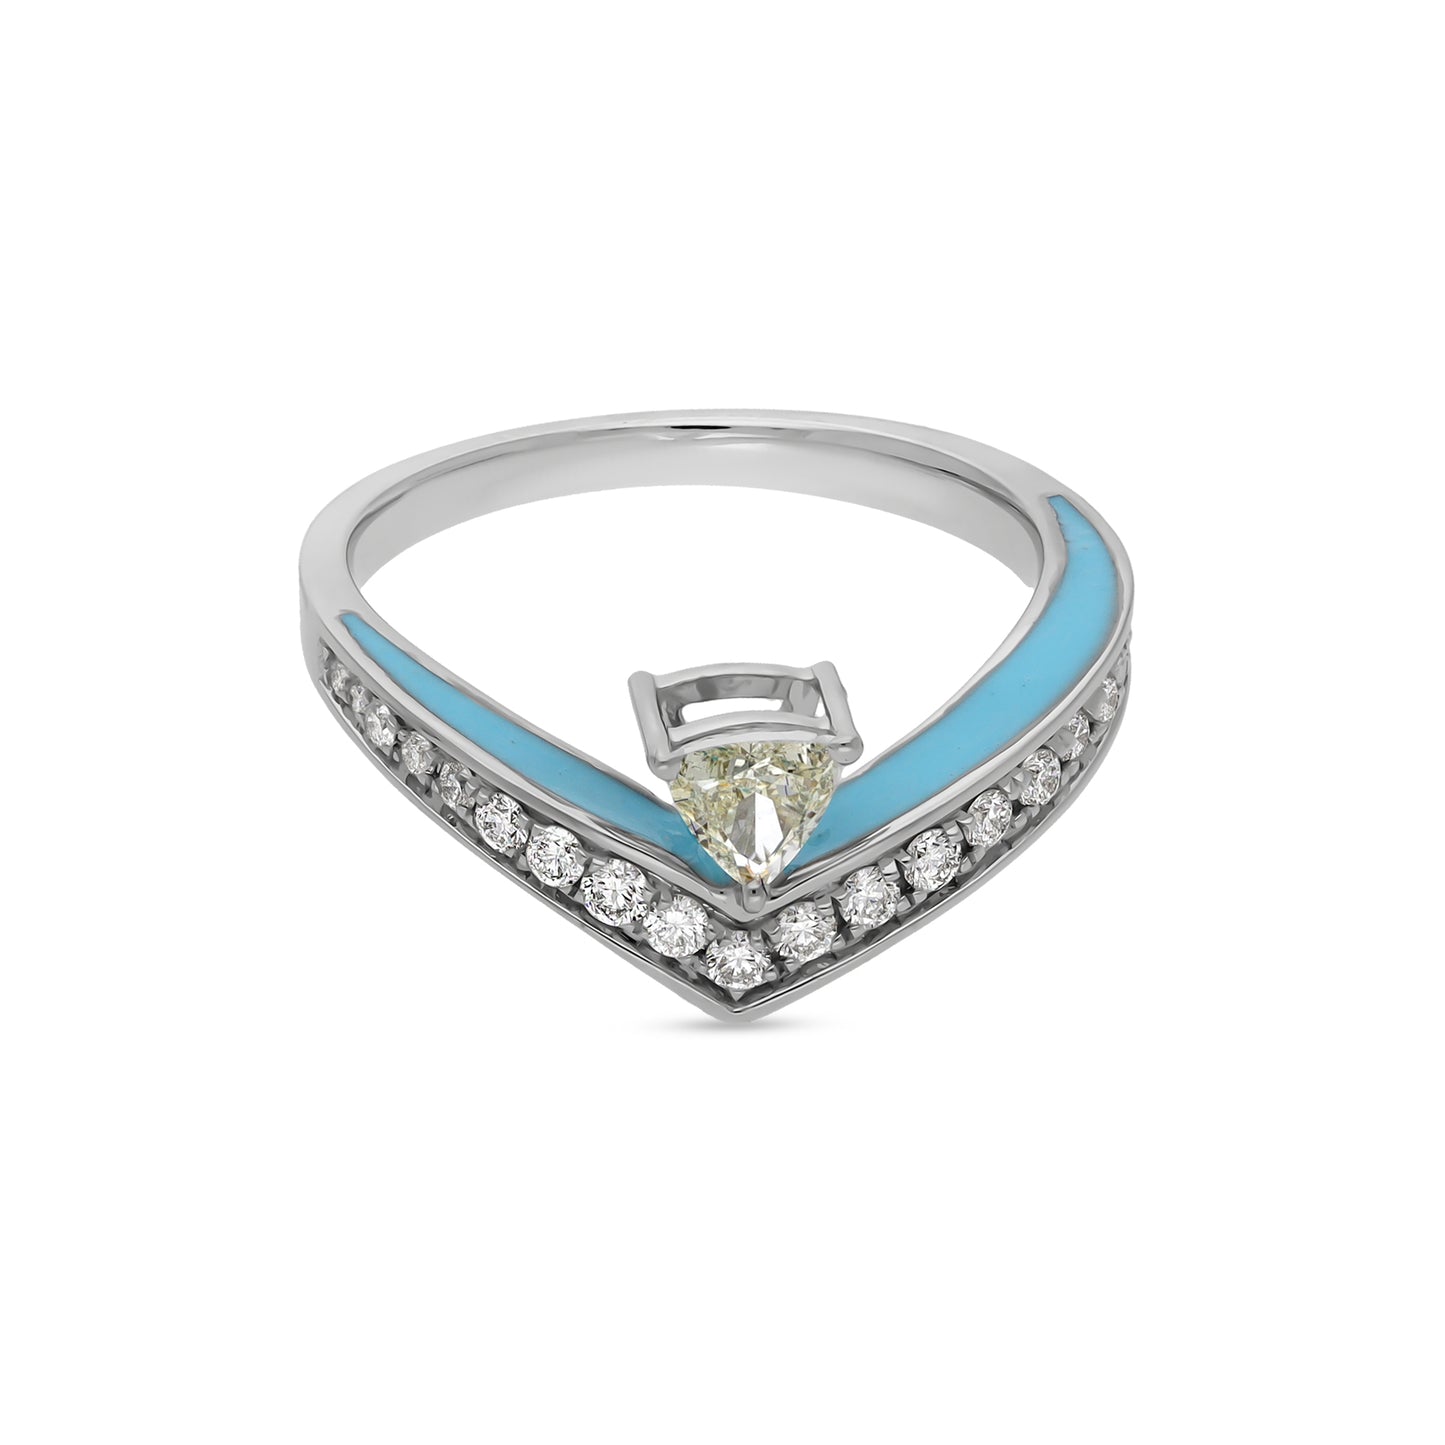 Sky Blue Enamel With Triangle Diamond White Gold Casual Ring